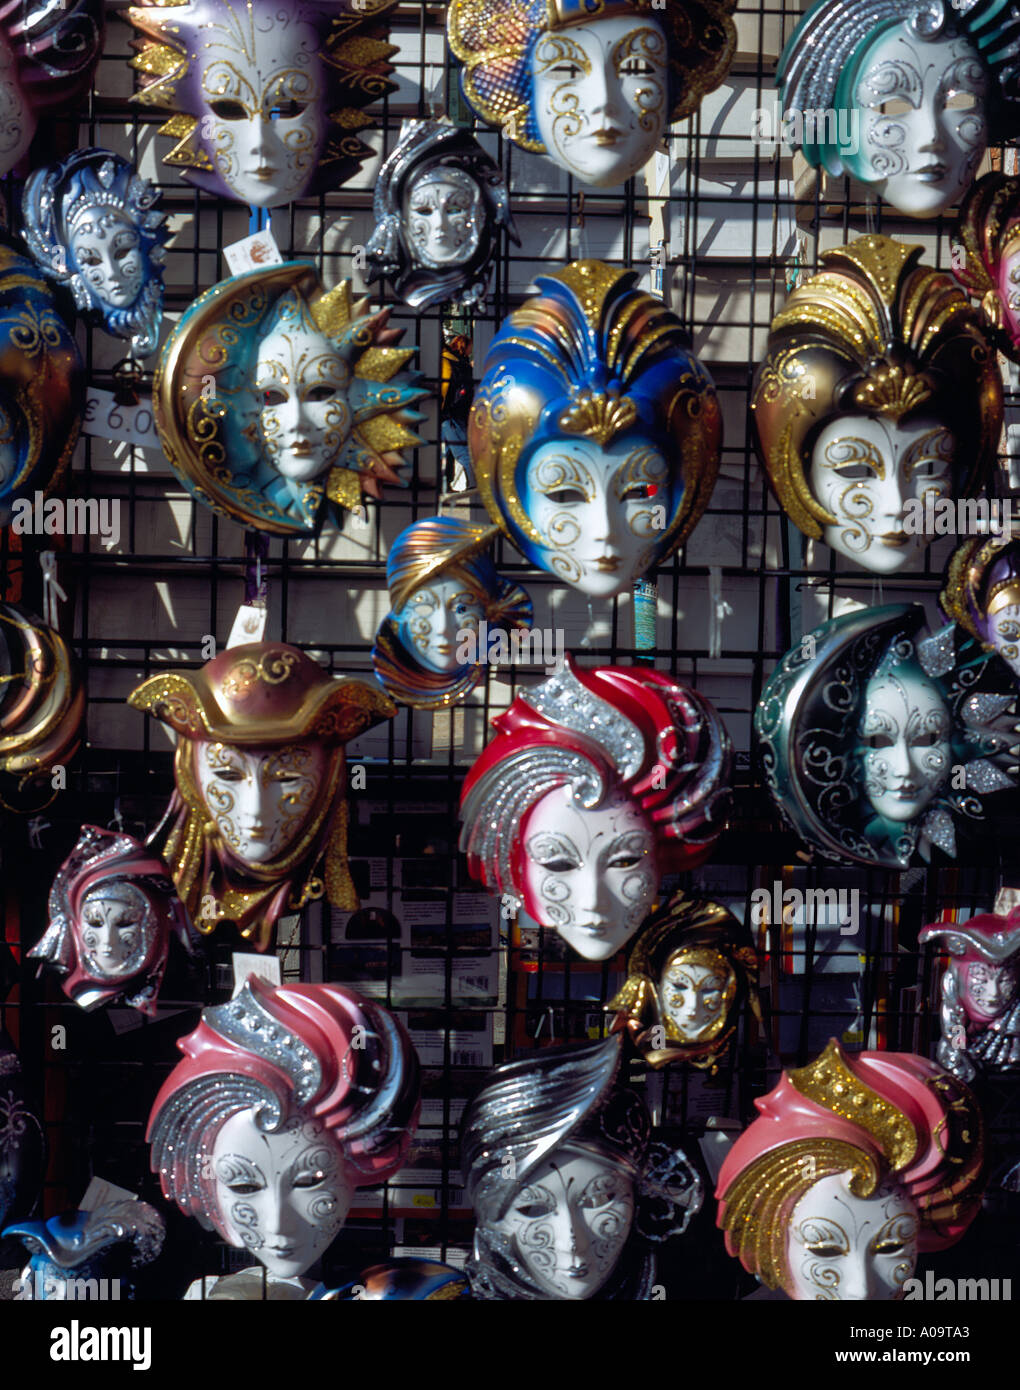 carnival masks for sale Venice Italy Europe. Photo by Willy Matheisl Stock Photo